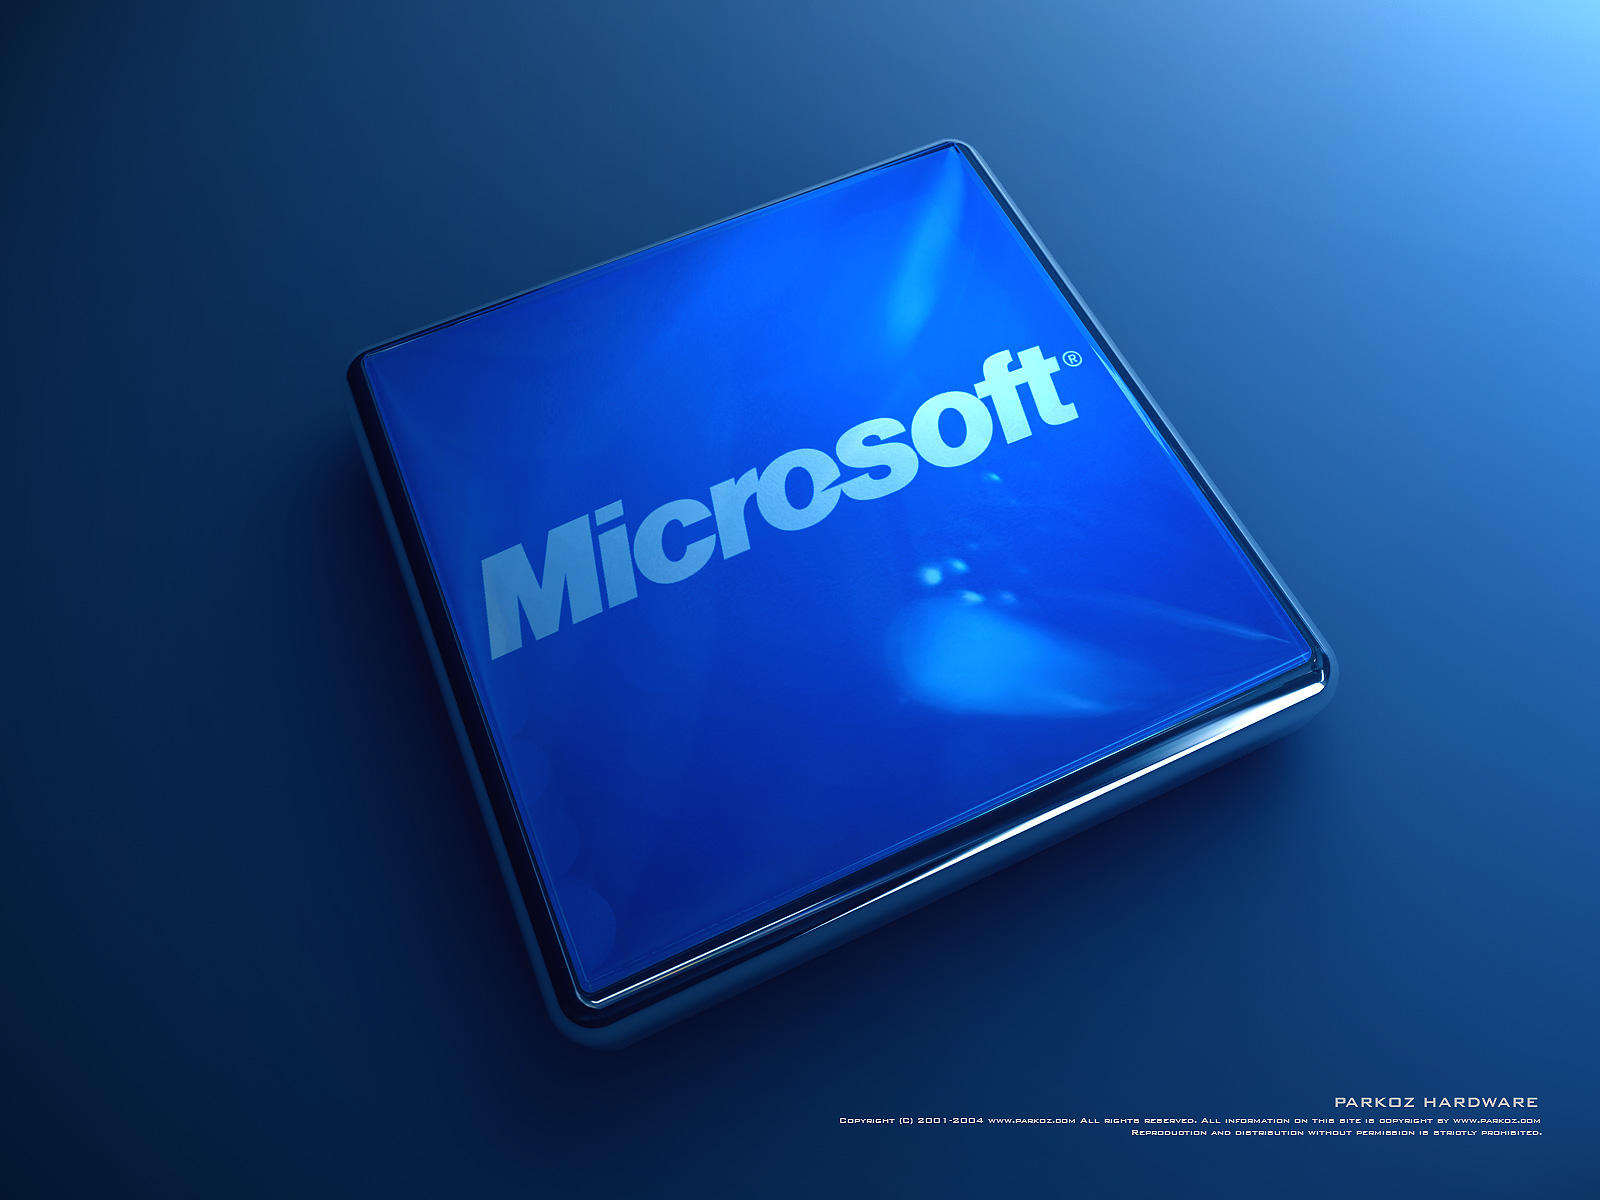  Download Free Microsoft Wallpapers Photos Pictures and Backgrounds